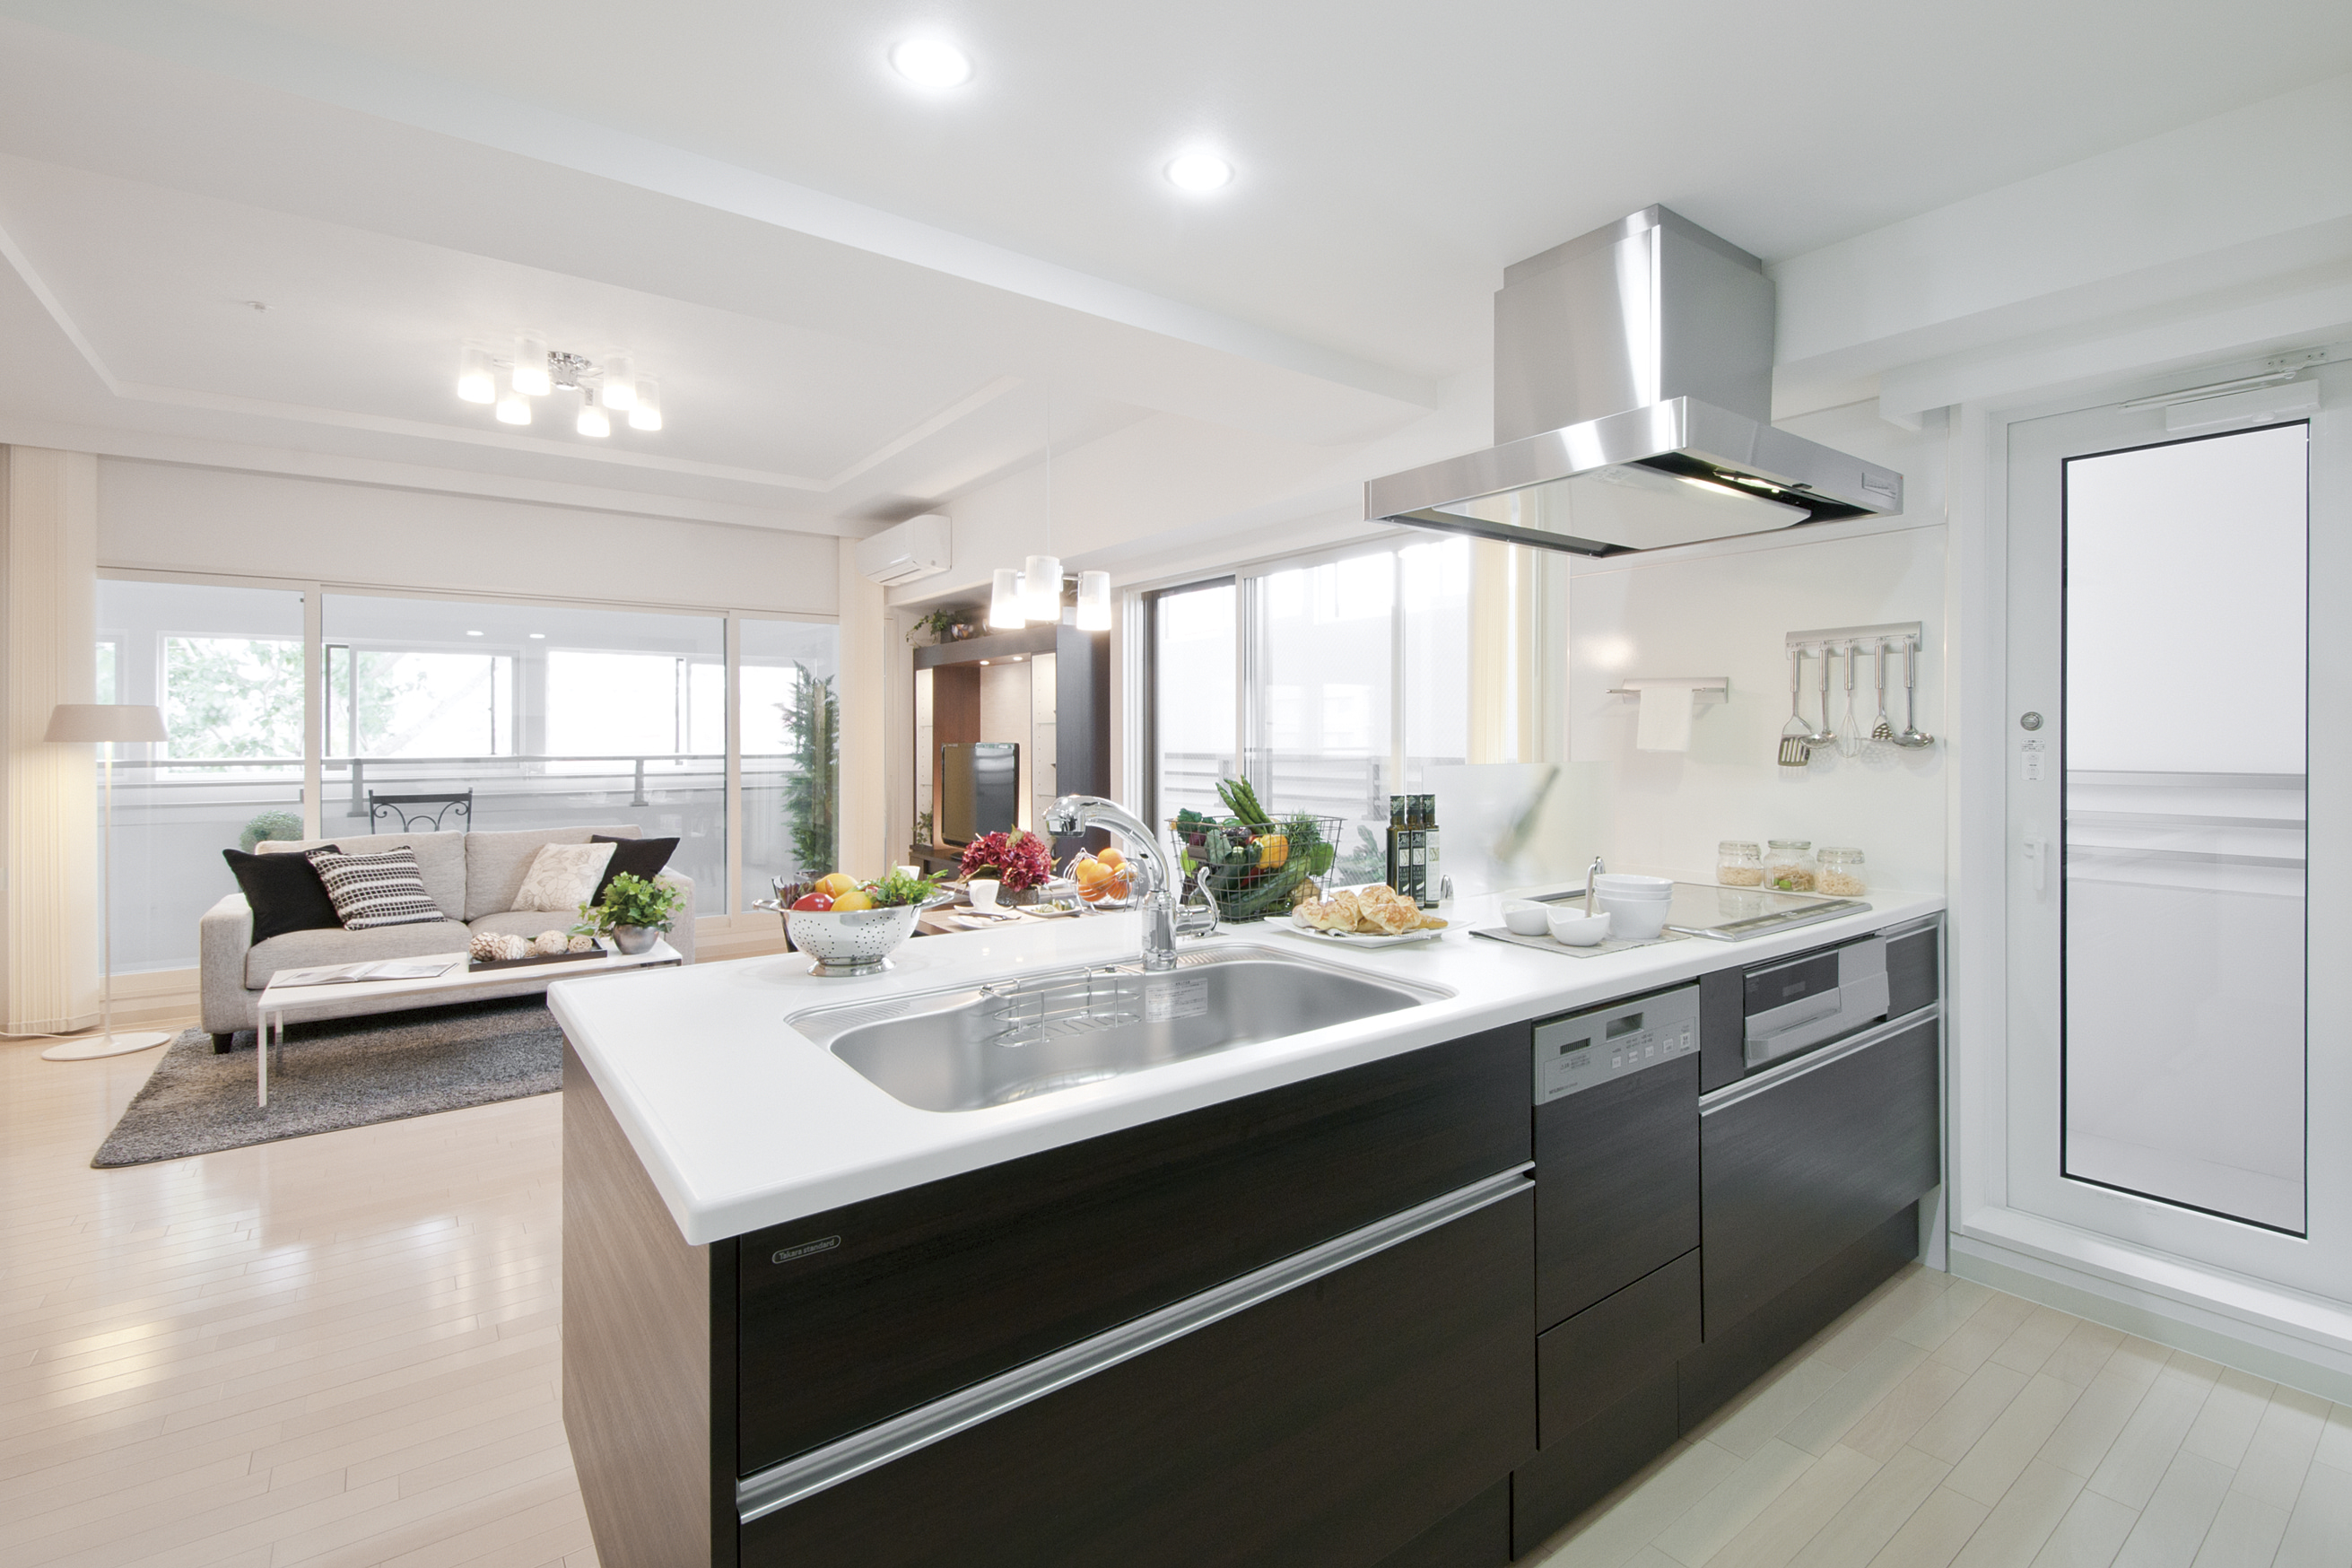 Wide flat type of kitchen counter work space of artificial marble. You can cook and Ready-To-Eat also efficiently. Model room types directly out of the can from the kitchen to the balcony, It is also useful to the temporary storage of the drink